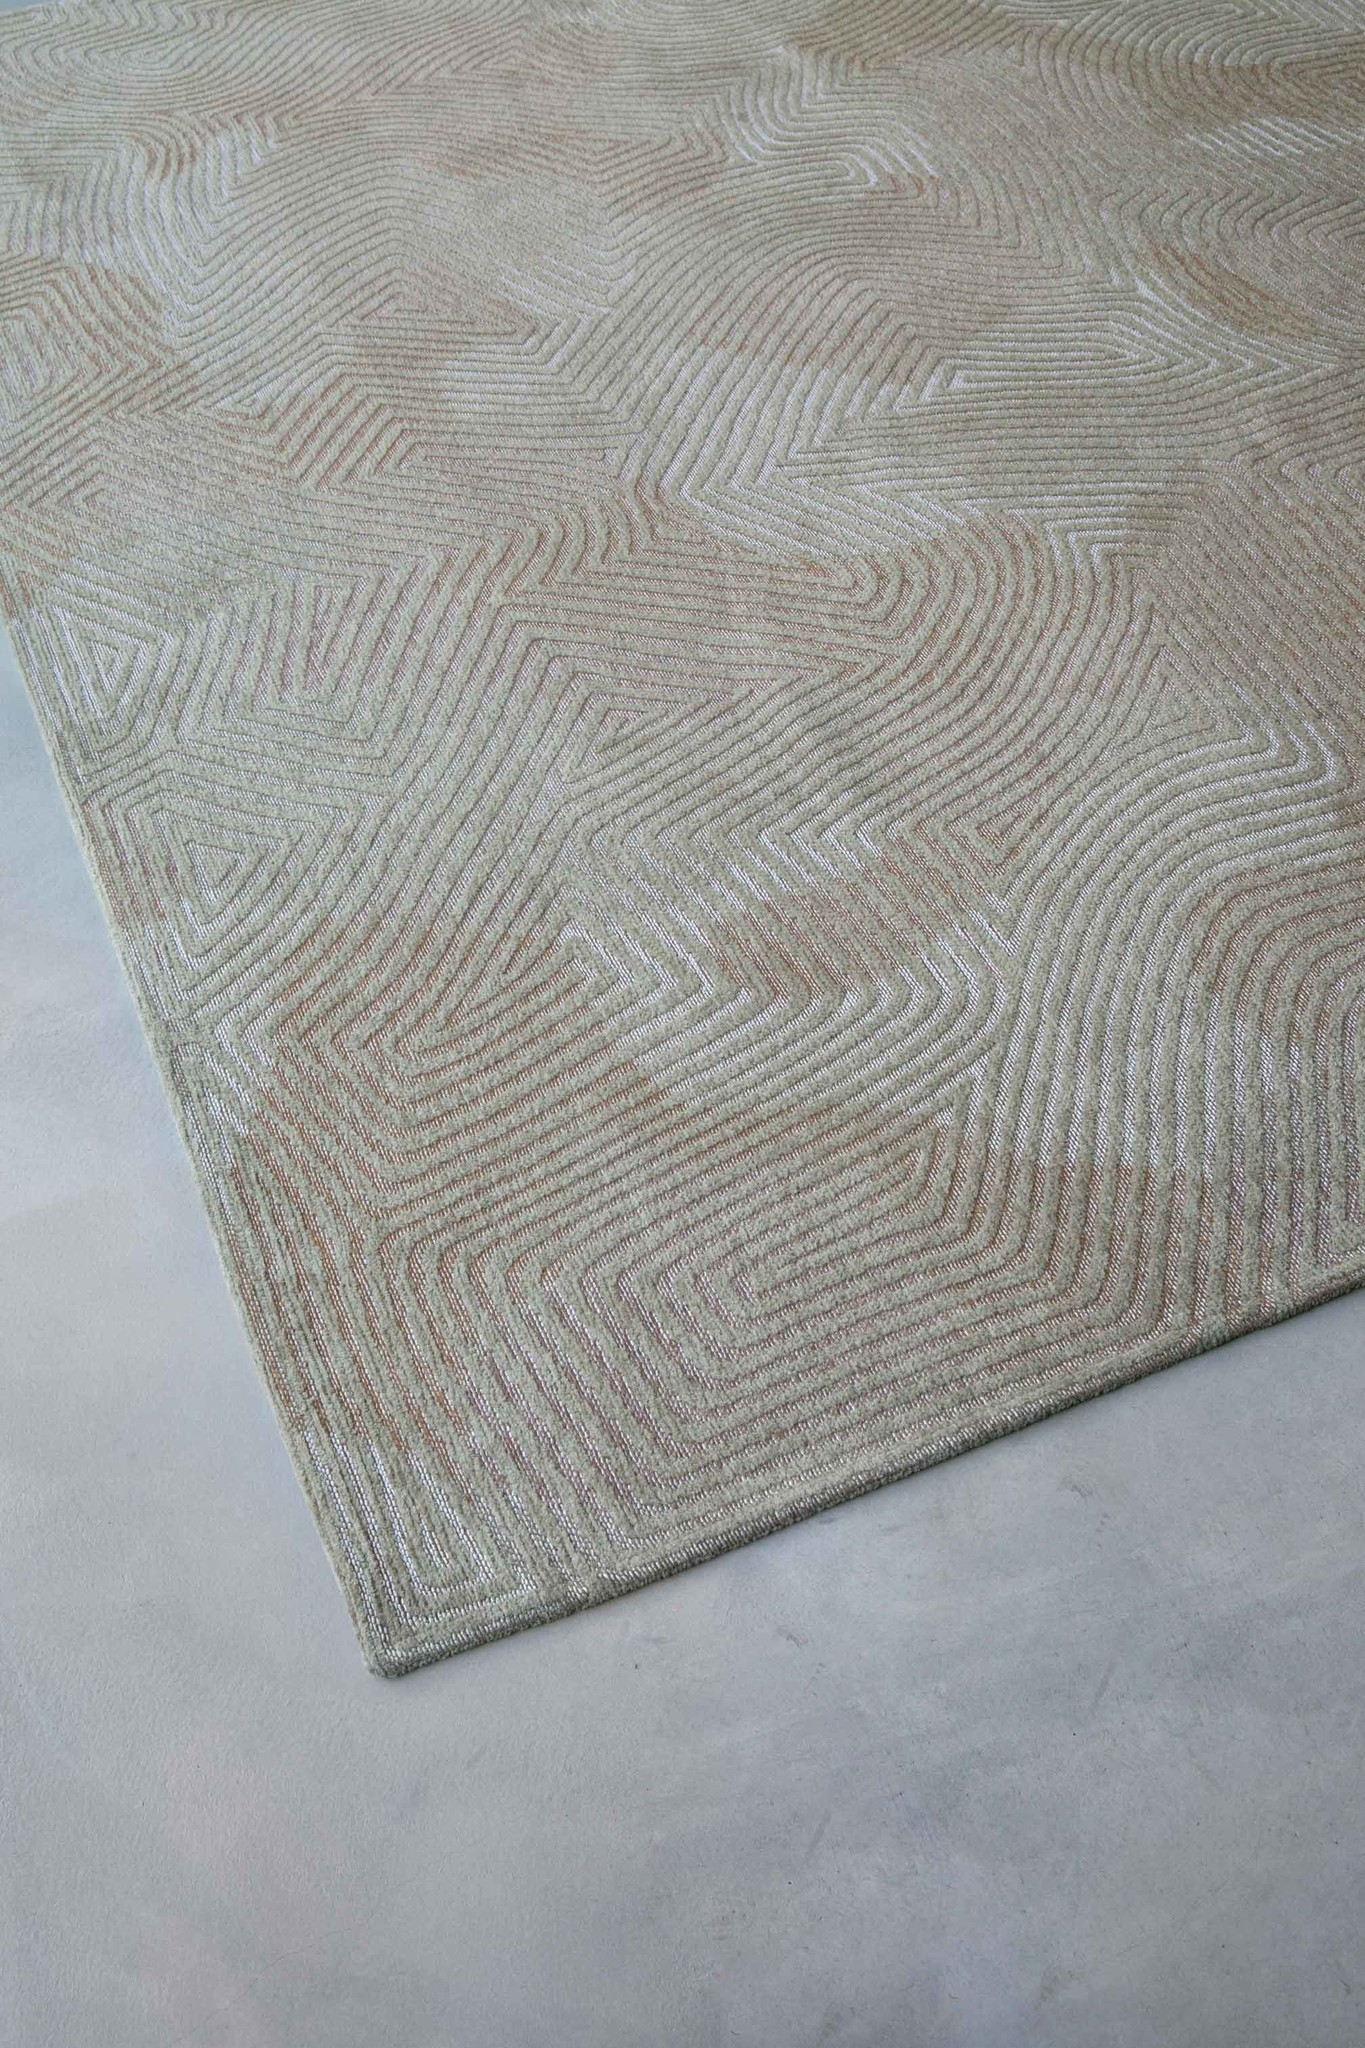 Coral - Shell Beige 9229 ☞ Size: 80 x 250 cm